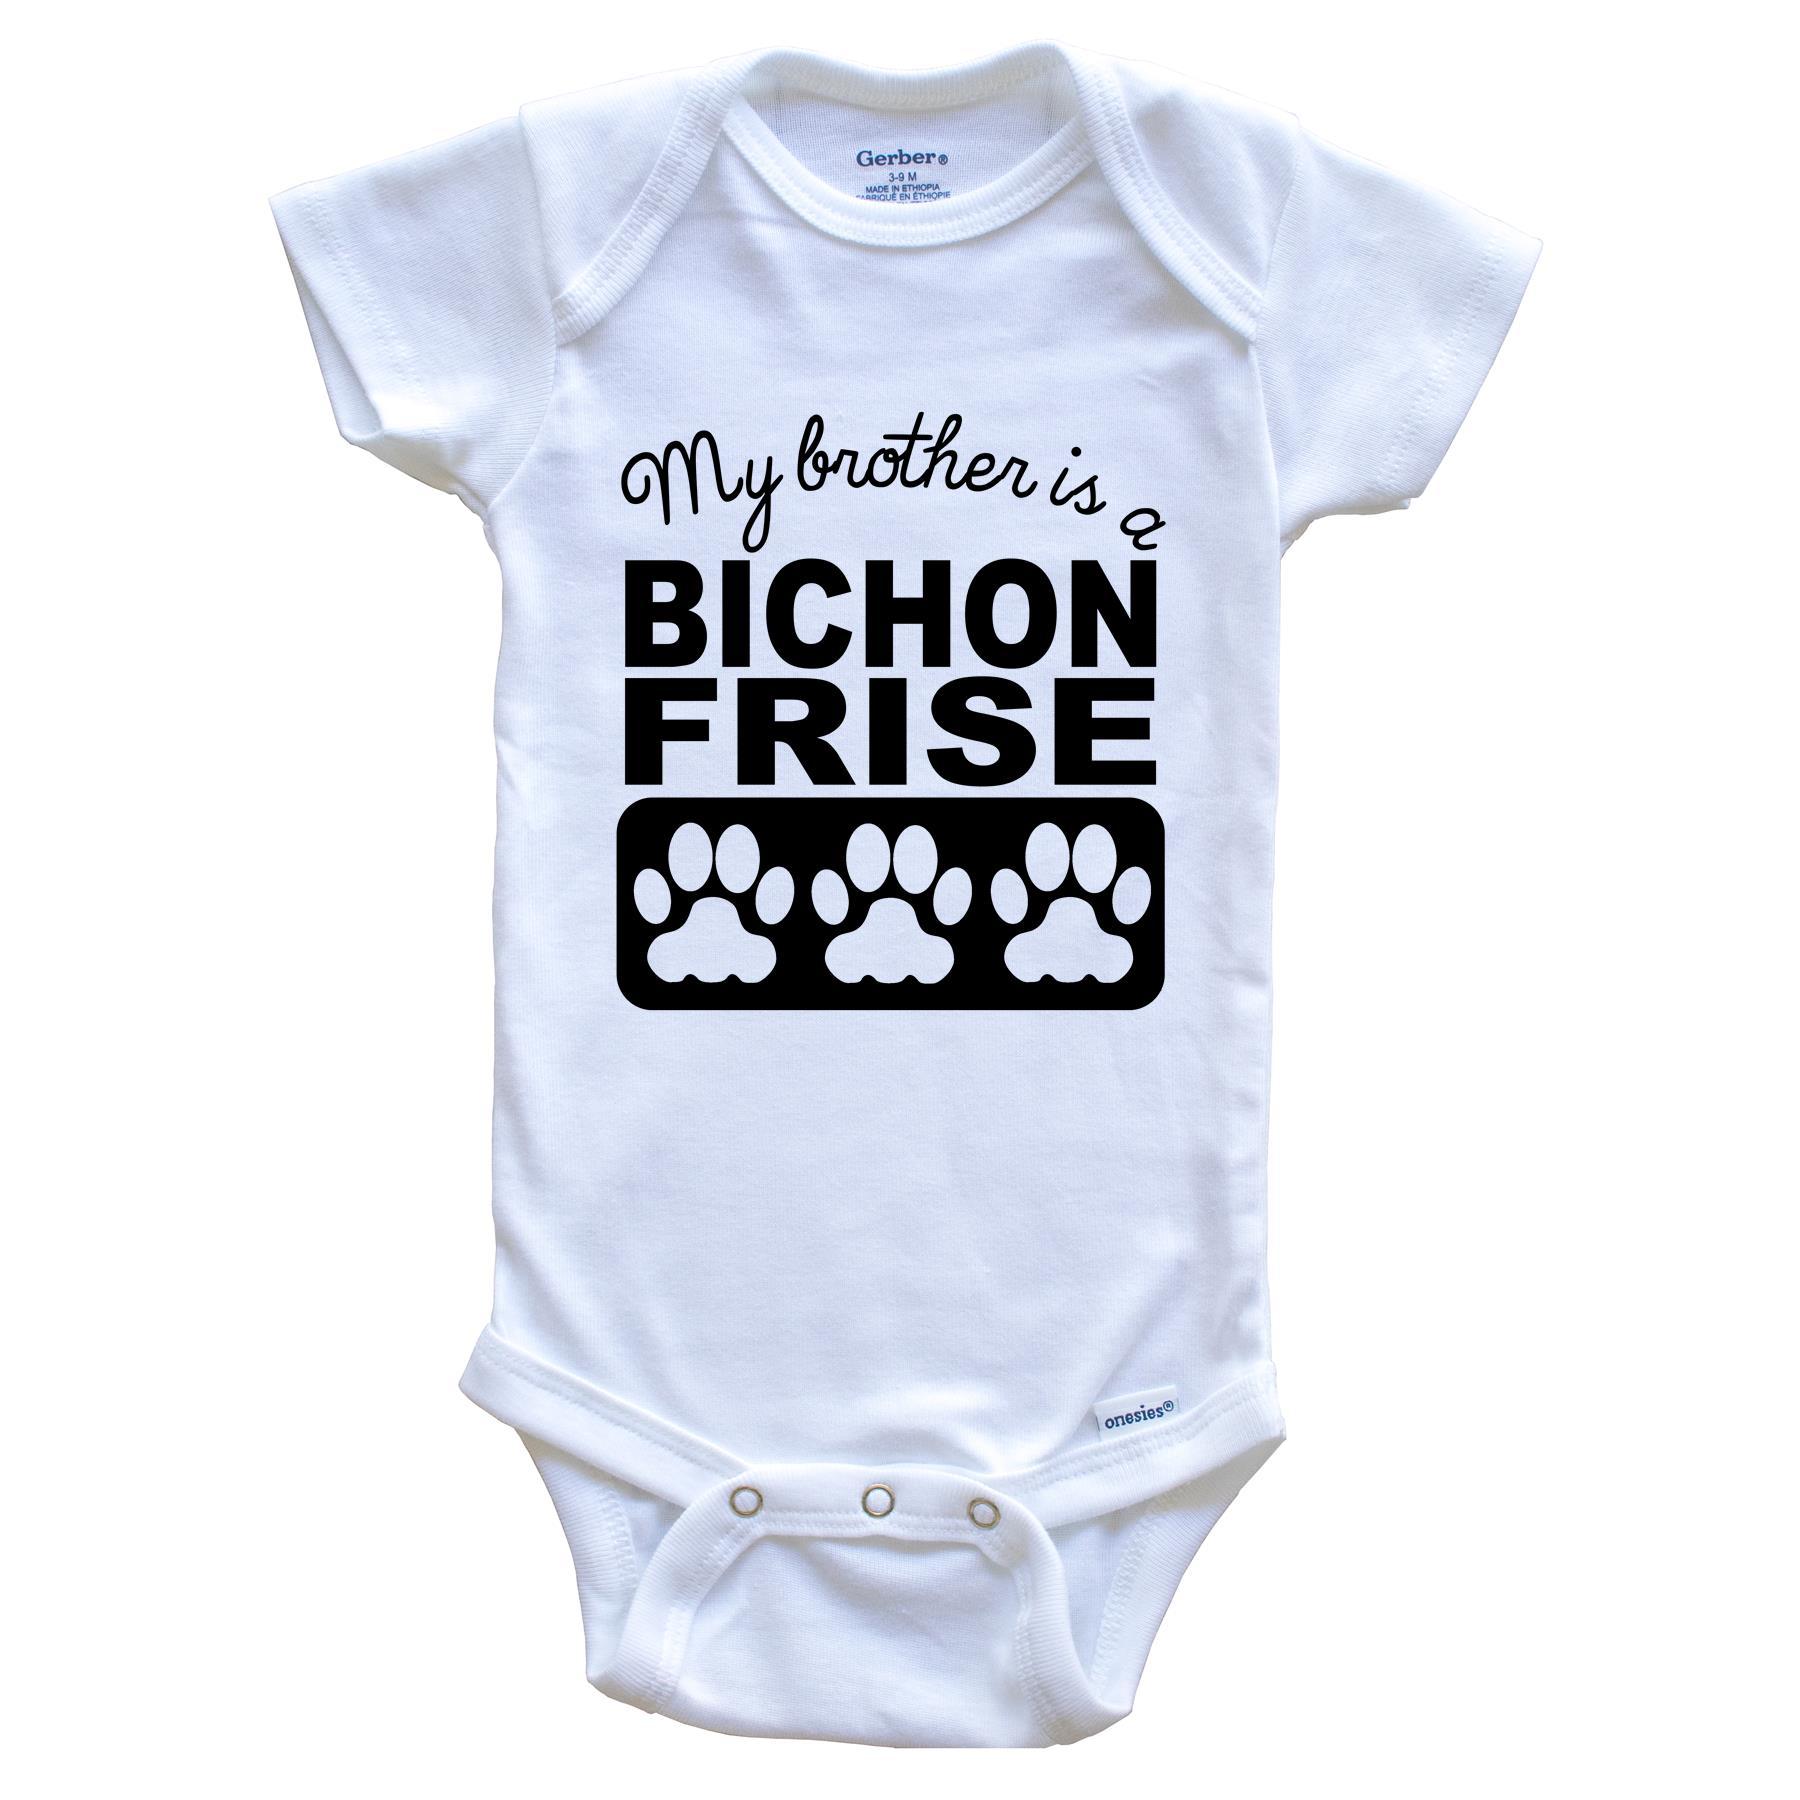 My Brother Is A Bichon Frise Baby Onesie